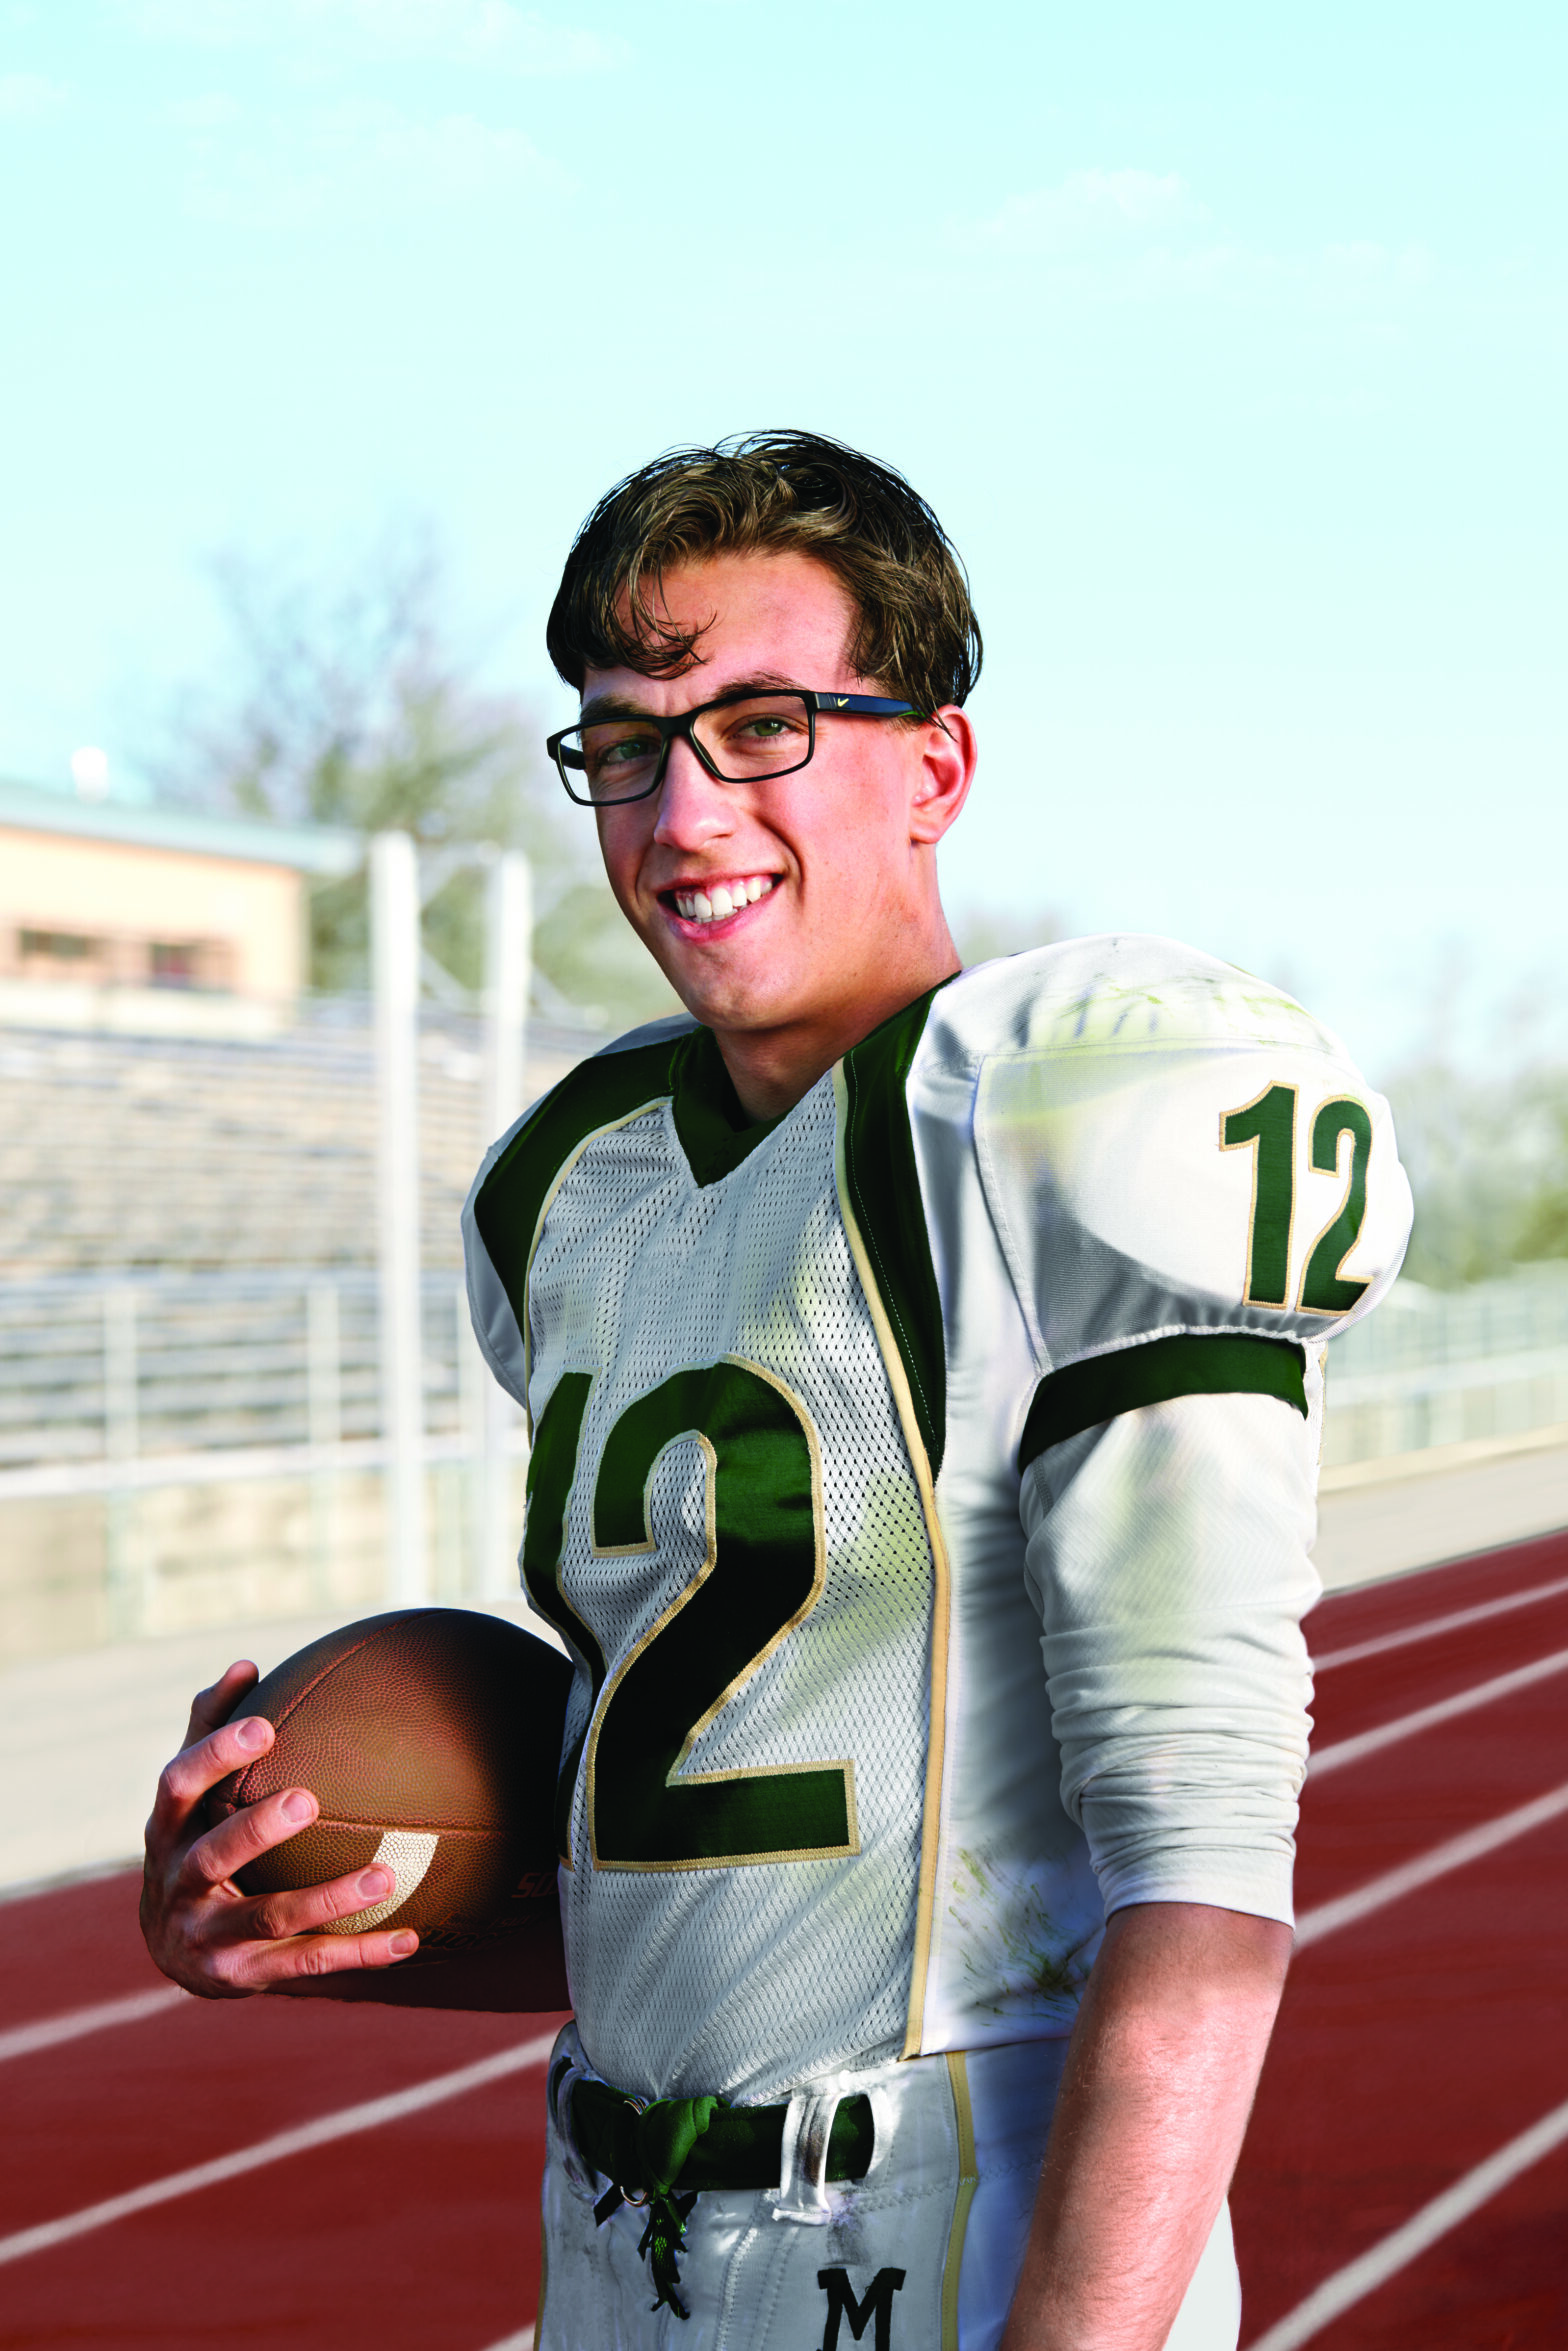 An athlete holds a football and poses in his uniform and black-framed glasses.